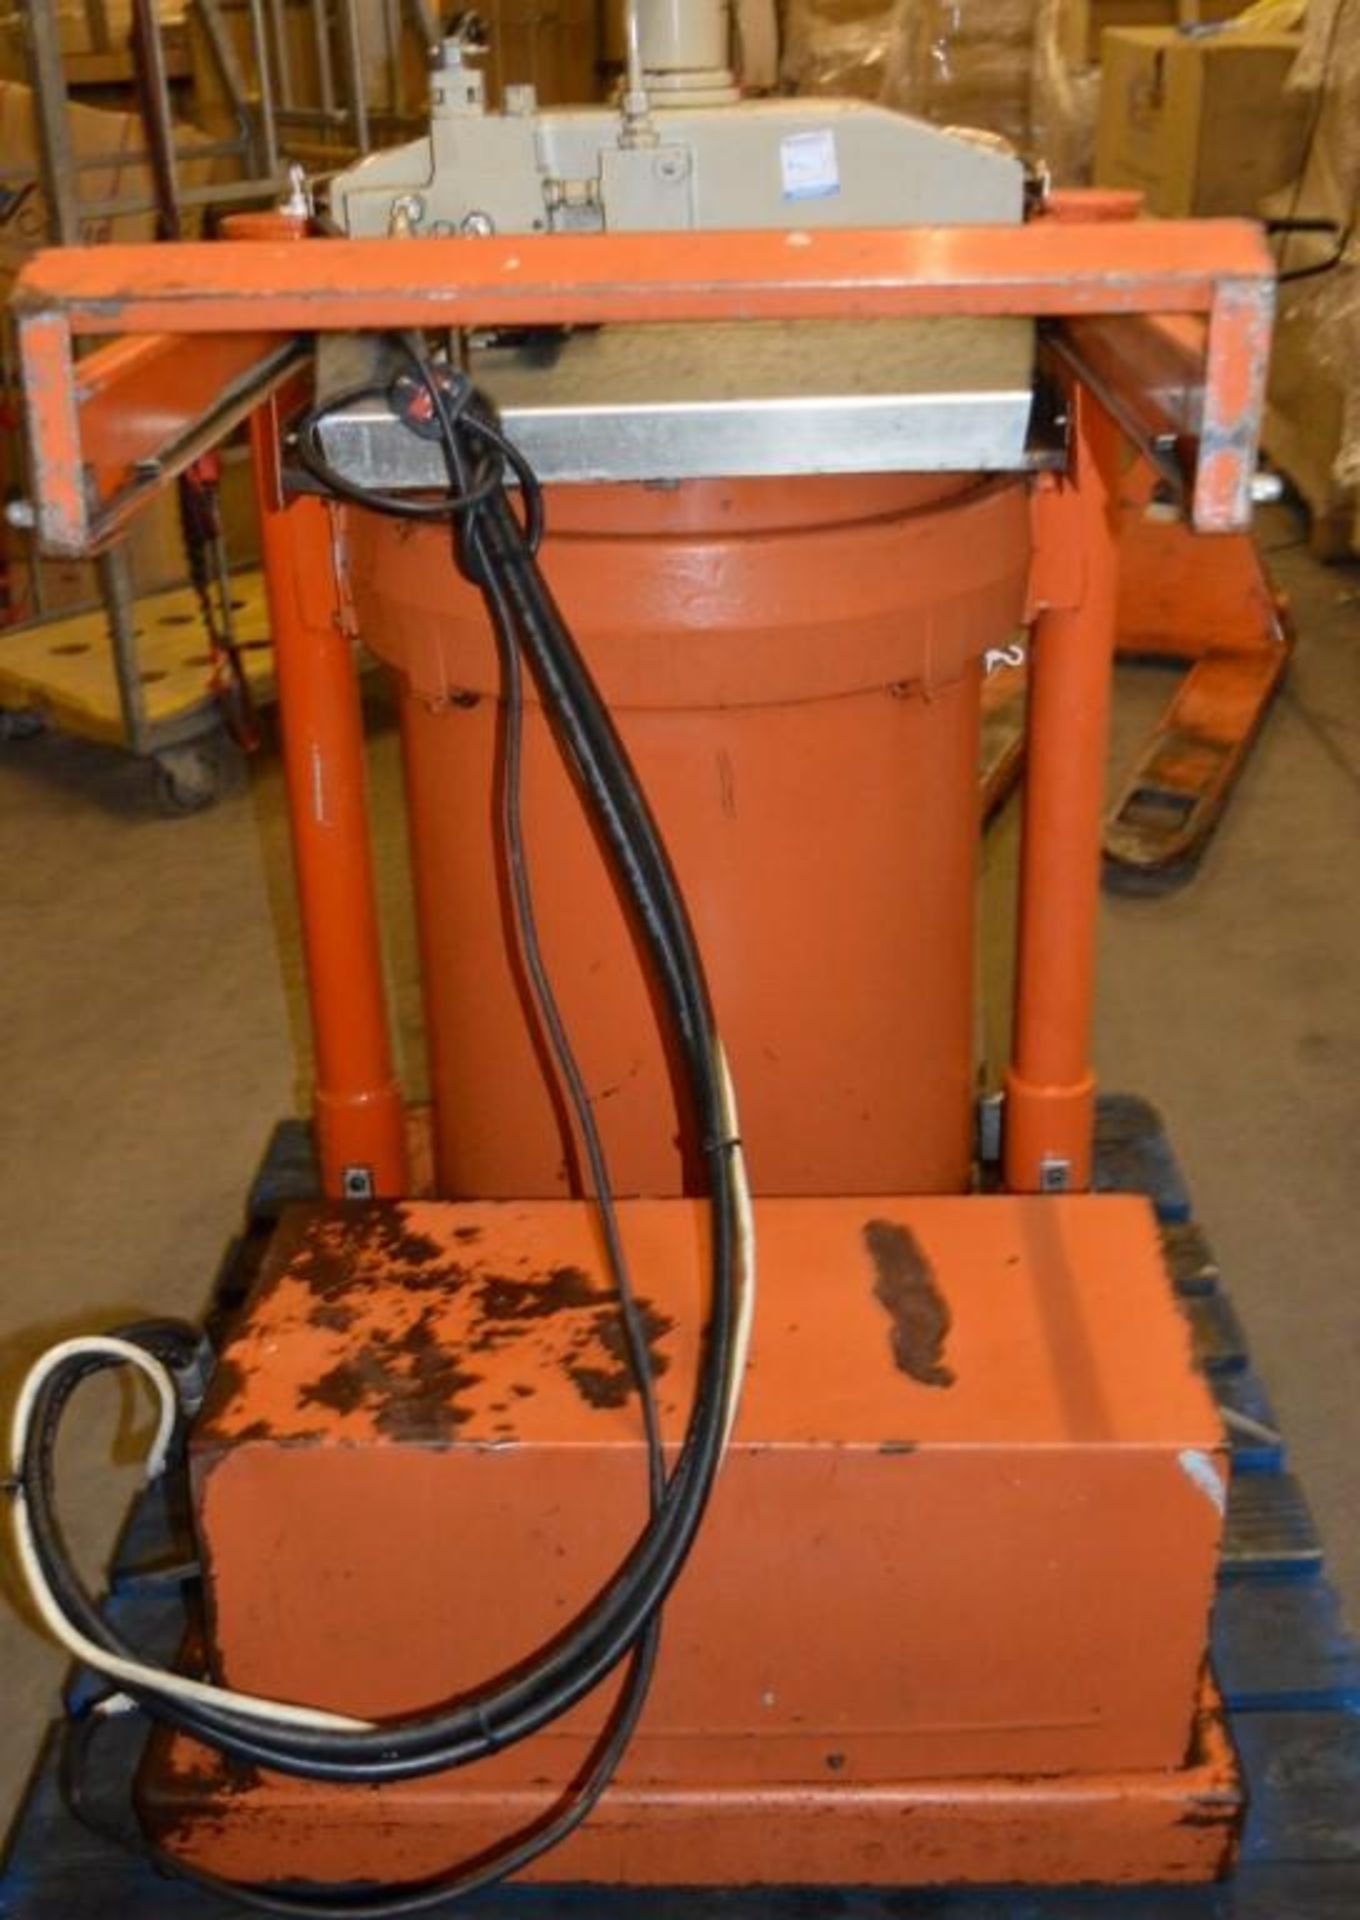 1 x Orwak 5030 Waste Compactor Bailer - Used For Compacting Recyclable or Non-Recyclable Waste - Image 2 of 4